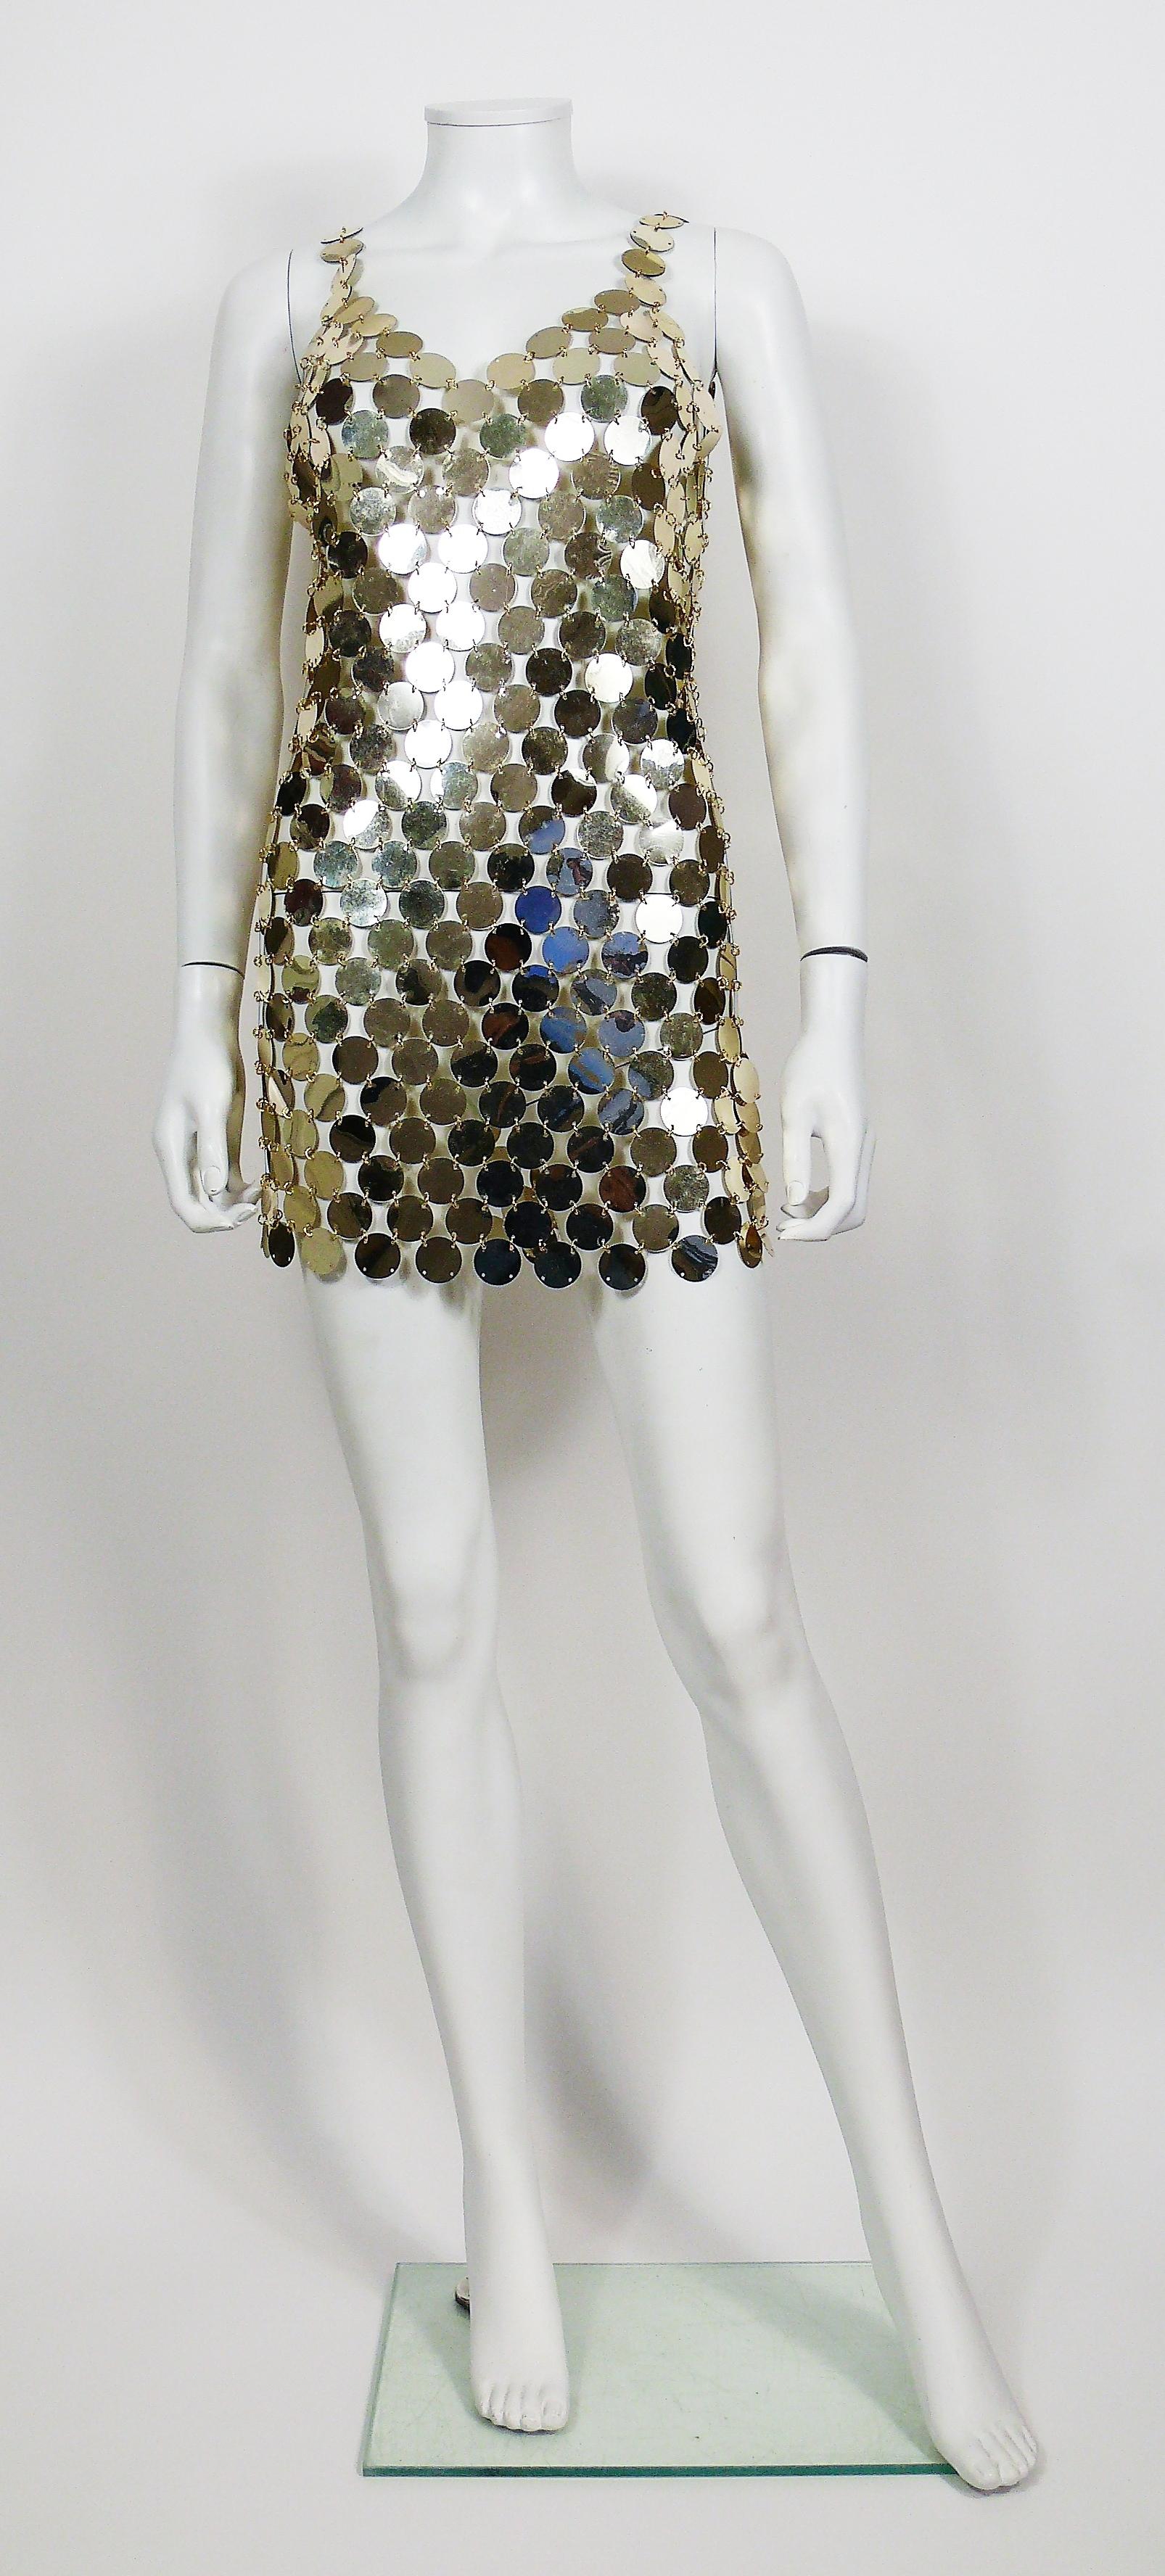 PACO RABANNE vintage DIY rhodoid disc mini dress from 1996, rare and collectable example of a re-issued of the iconic 1966 PACO RABANNE dress (photographied on the cover of the British Vogue - May 1966 / see photo).

This dress is made of hundreds